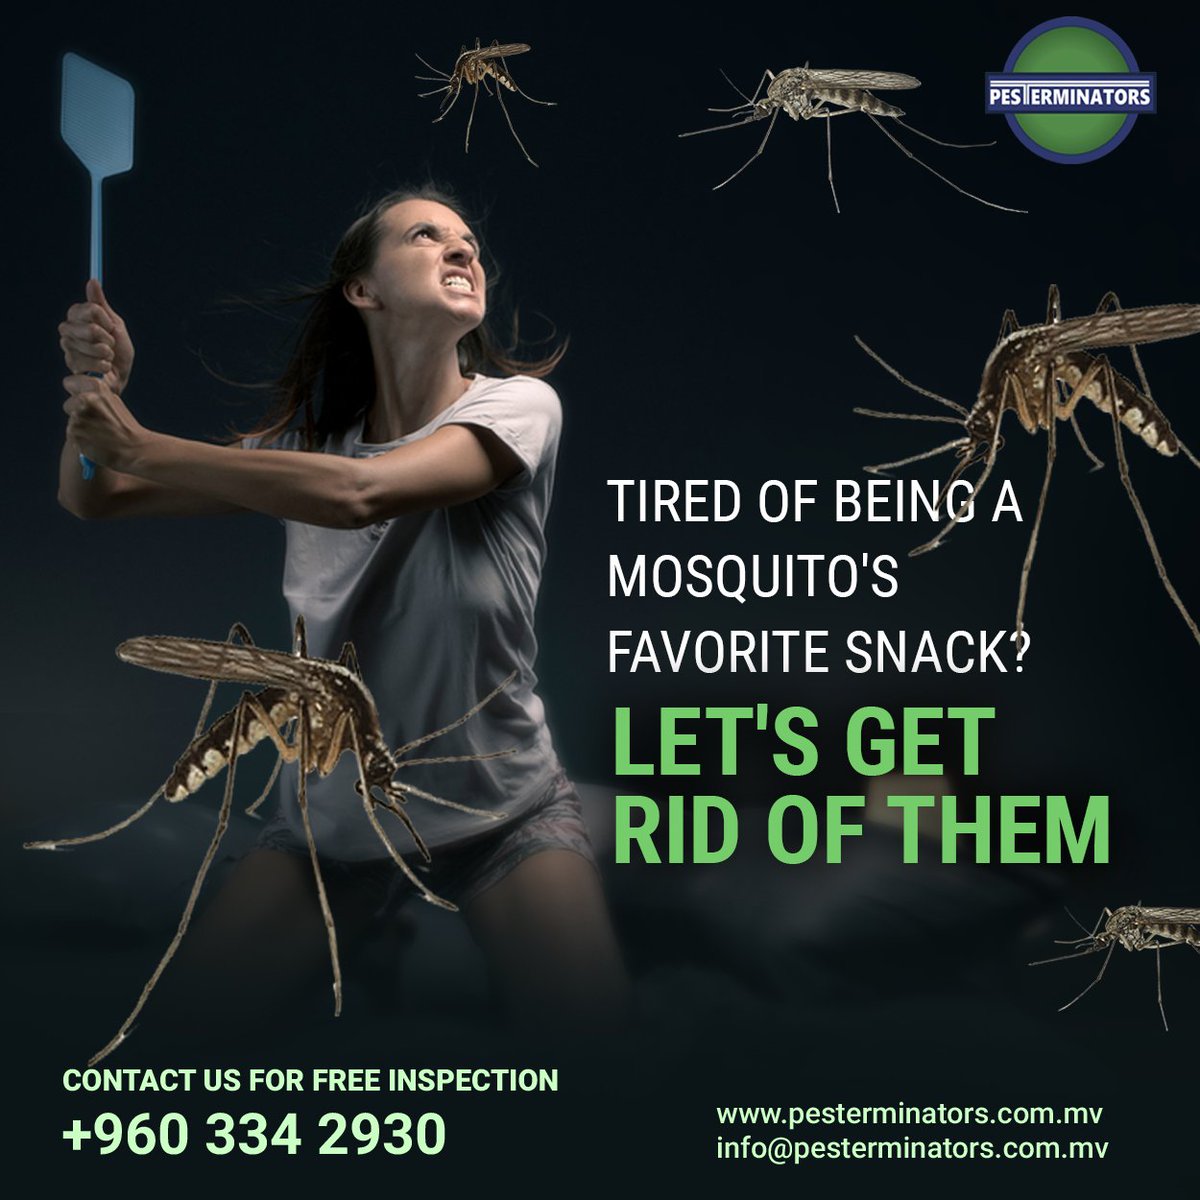 Tired of being a mosquito's favorite snack?
Let's get rid of them!

Contact us for Free Inspection at +960 3342930

#Pesterminators #MosquitoPrevention #OutdoorFun #MosquitoFreeSummer #EffectiveSolutions #TailoredToYourNeeds #ComfortAndSafety #Maldives #PestControl #EcoFriendly